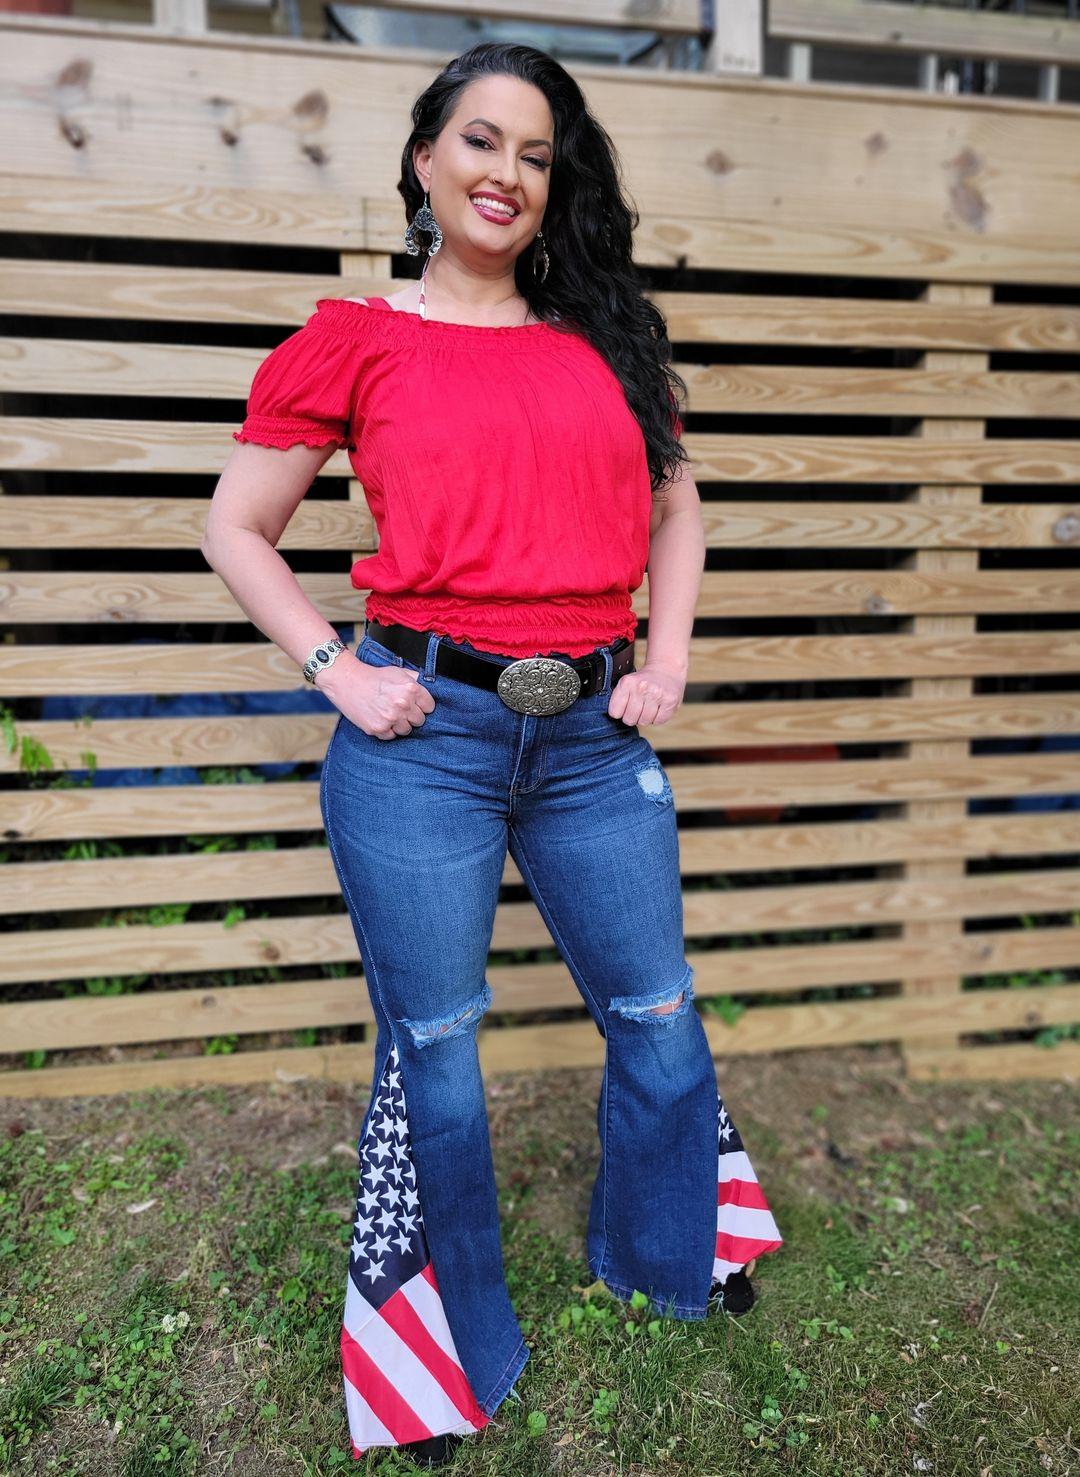 Made in America Distressed Stars & Stripes Flare Jeans  33-34" inseam - american, americanflag, bell, bells, bottom, botttoms, cowgirl, distressed, flag, flared, flaredjeans, flares, jeans, nfr, patriot, patriotic, PATRIOTICFASHION, patriotism, ripped, rodeo -  - Baha Ranch Western Wear